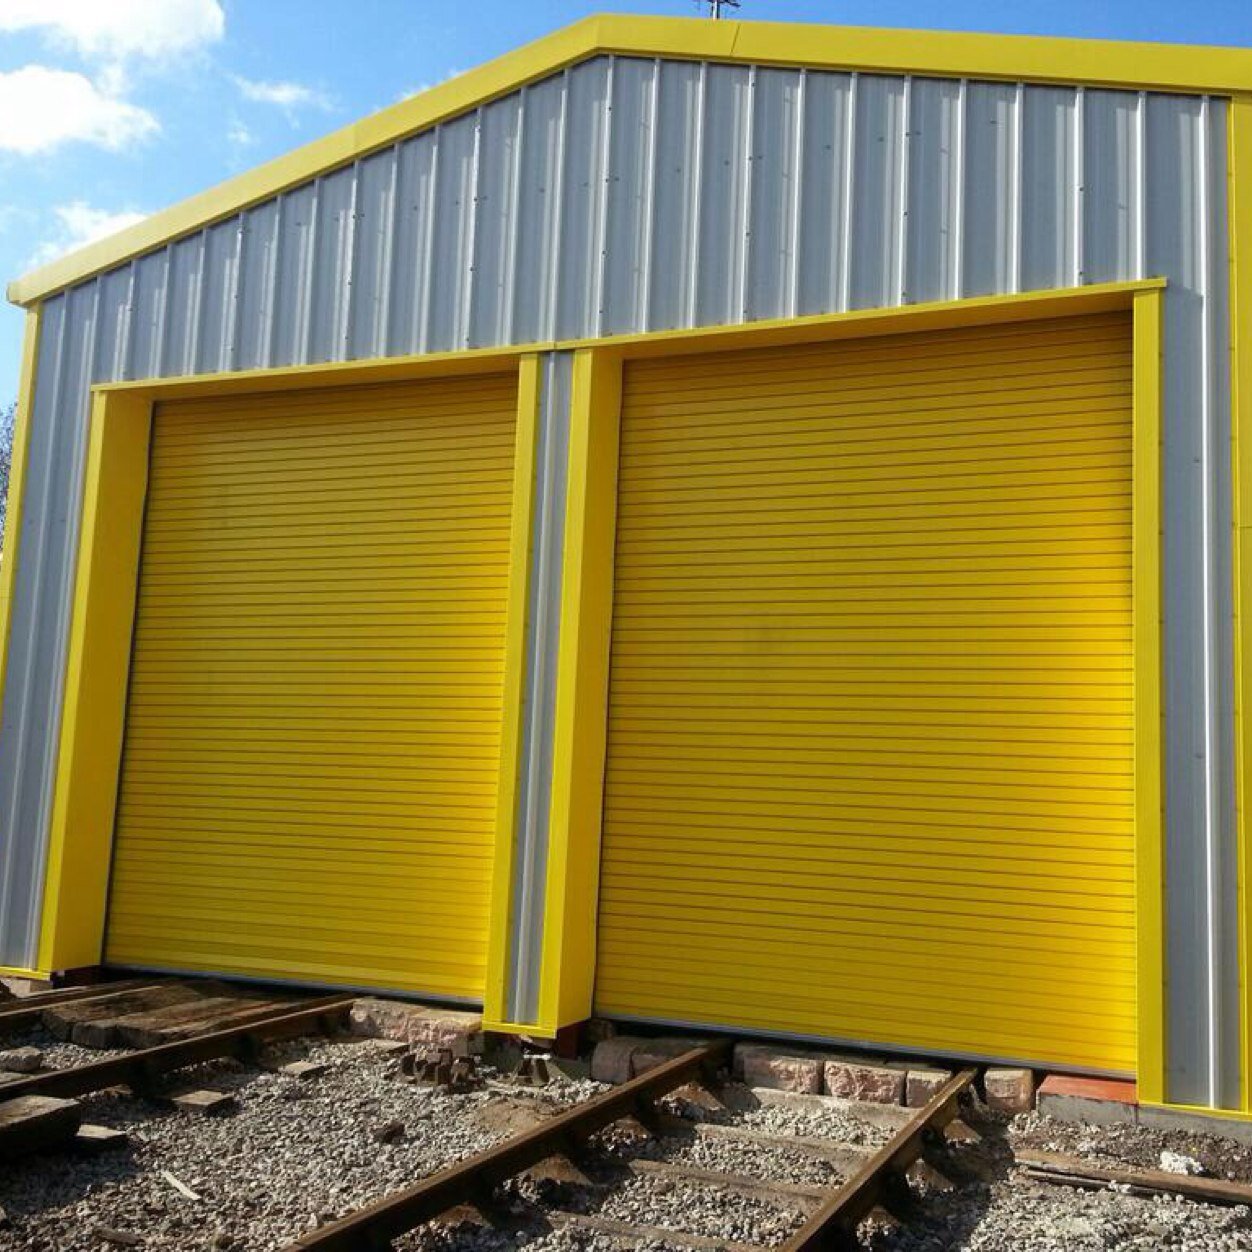 Est 1989 we are a successful & progressive family run company, which supplies and installs roller shutters, sectional doors, garage doors & fire exit doors.